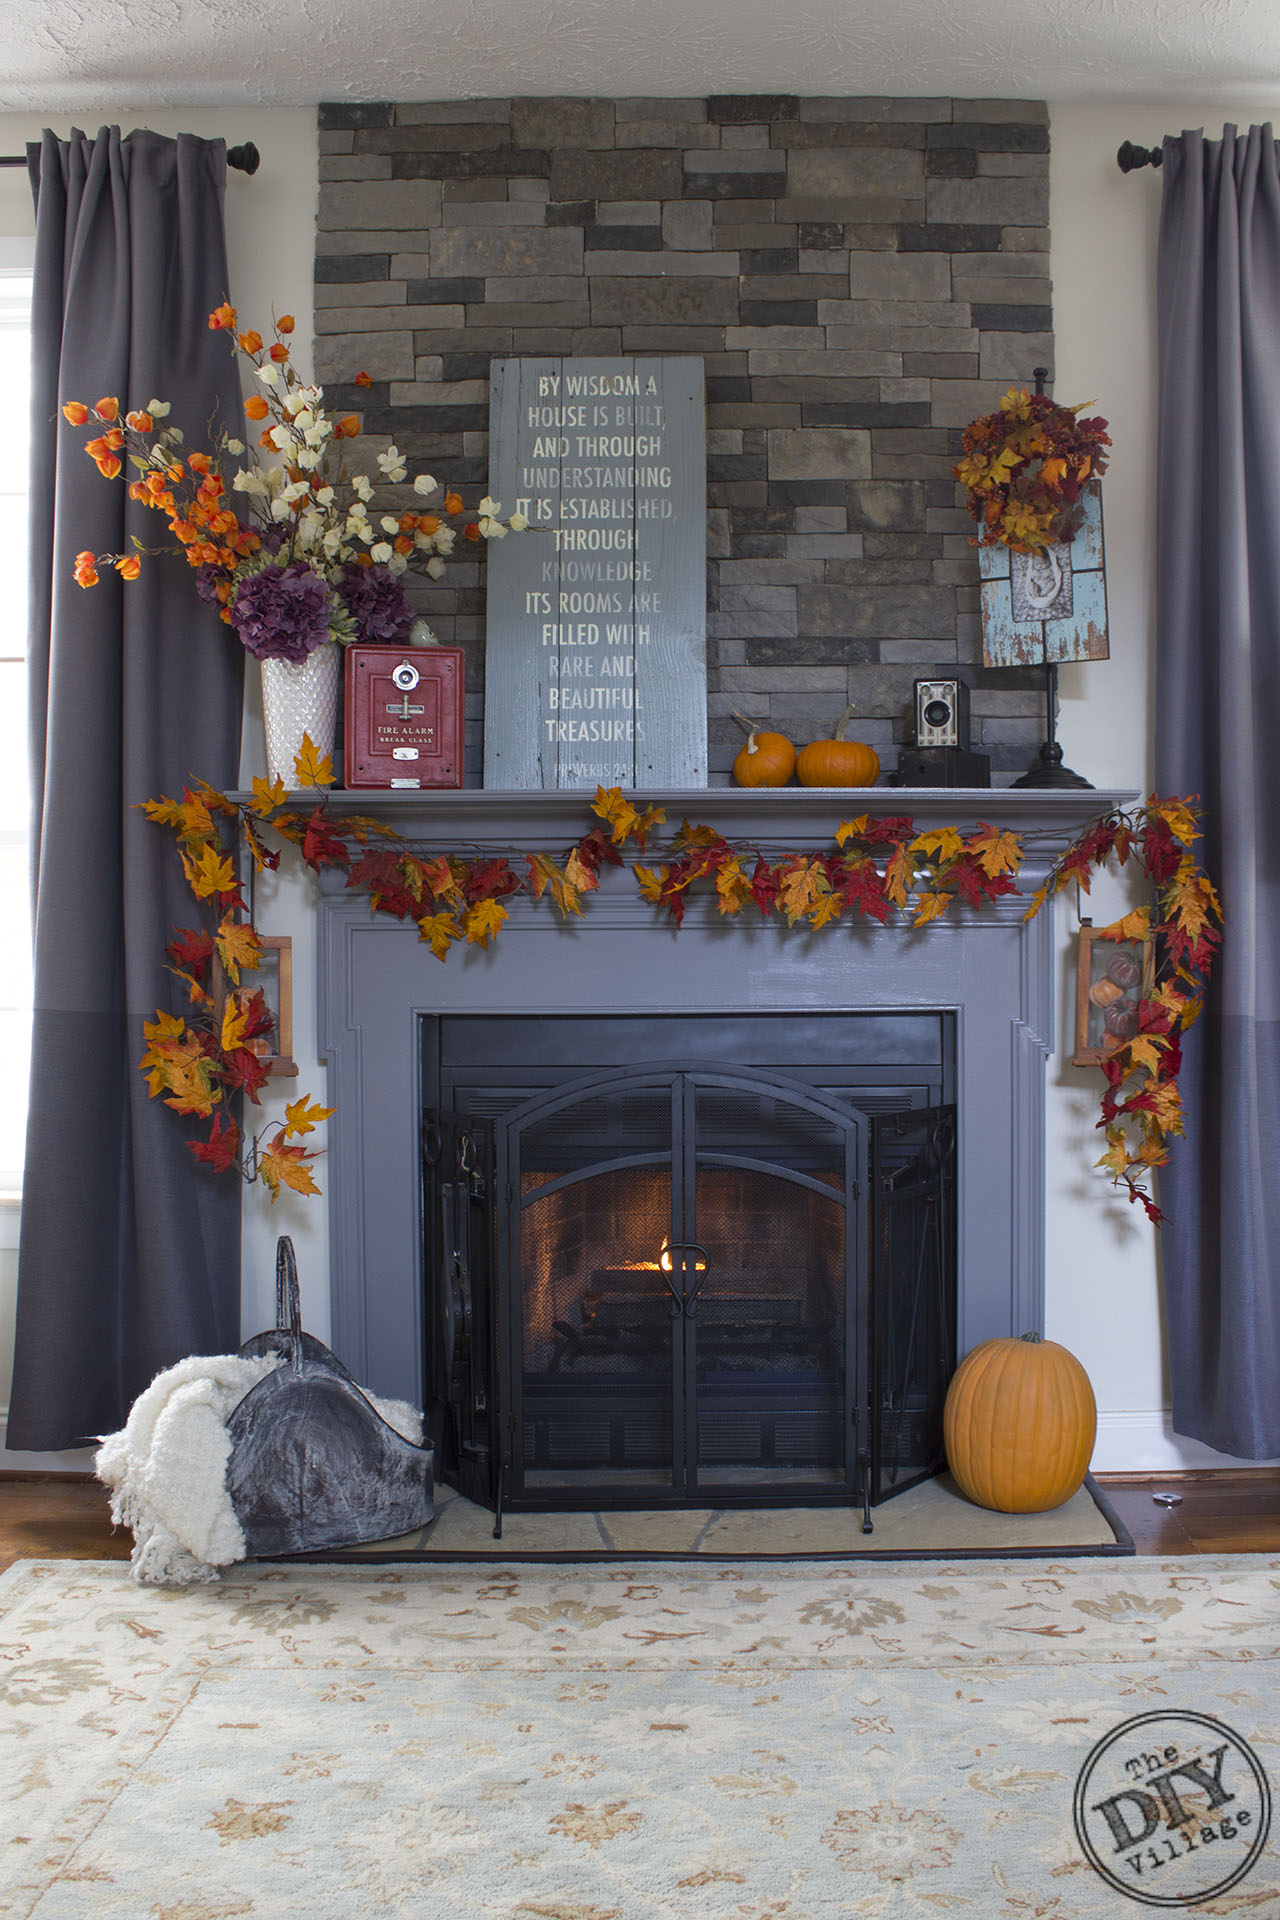 Easy tips for creating a home for cozy fall entertaining, indoors and outdoors.